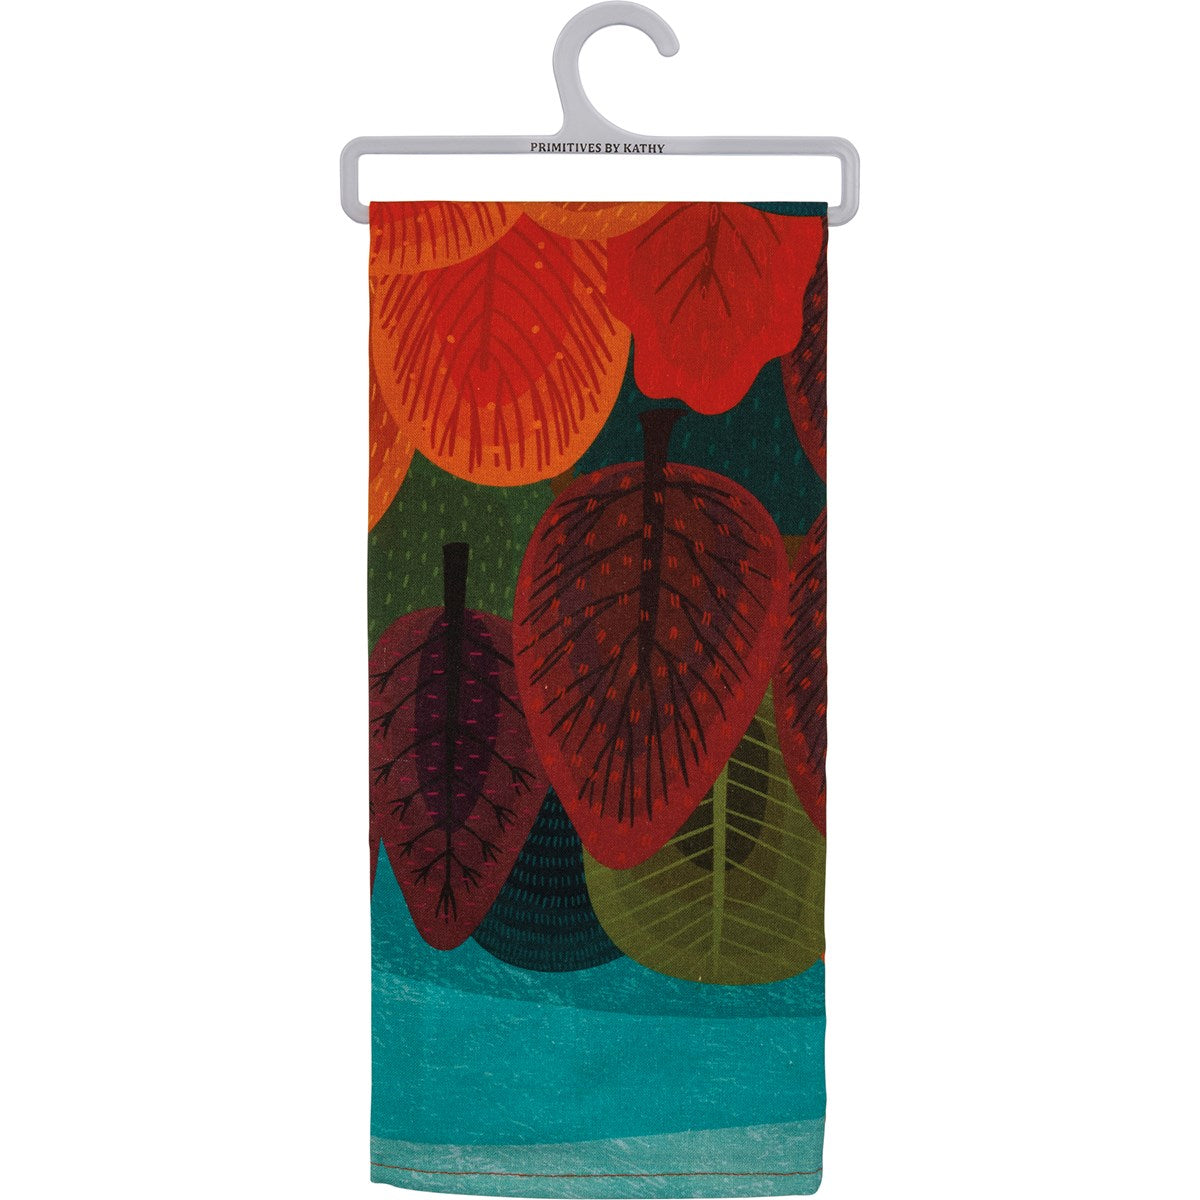 I Love Fall Most of All Kitchen Towel